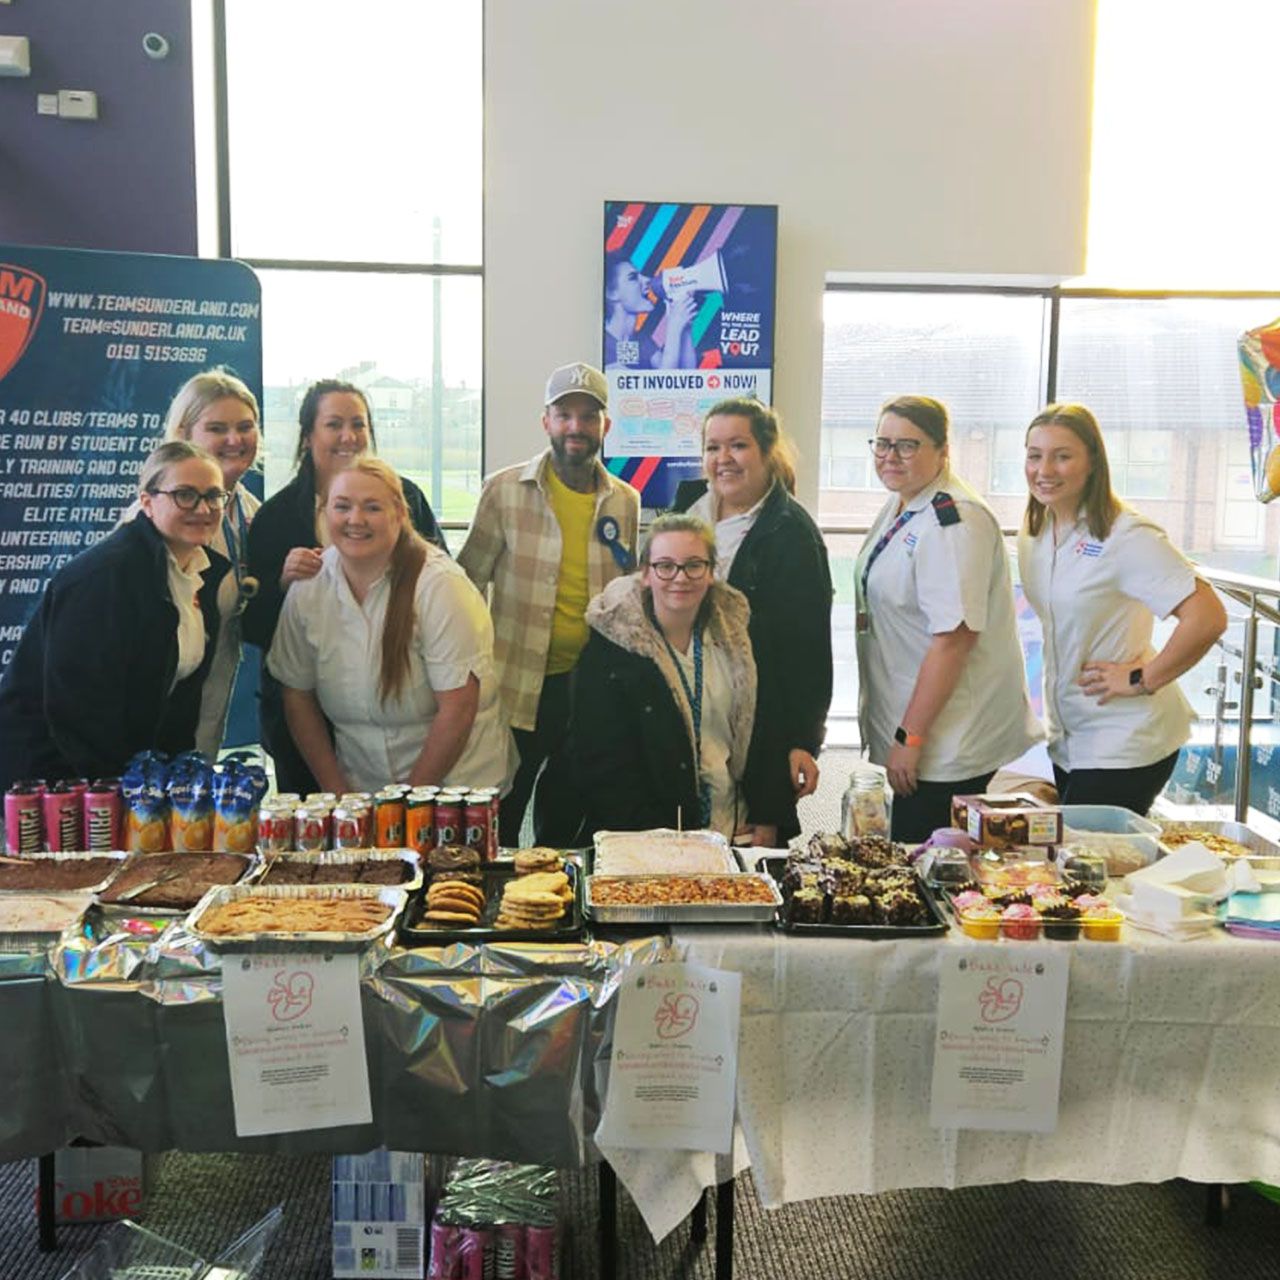 Midwifery students standing behind a table for a bake sale